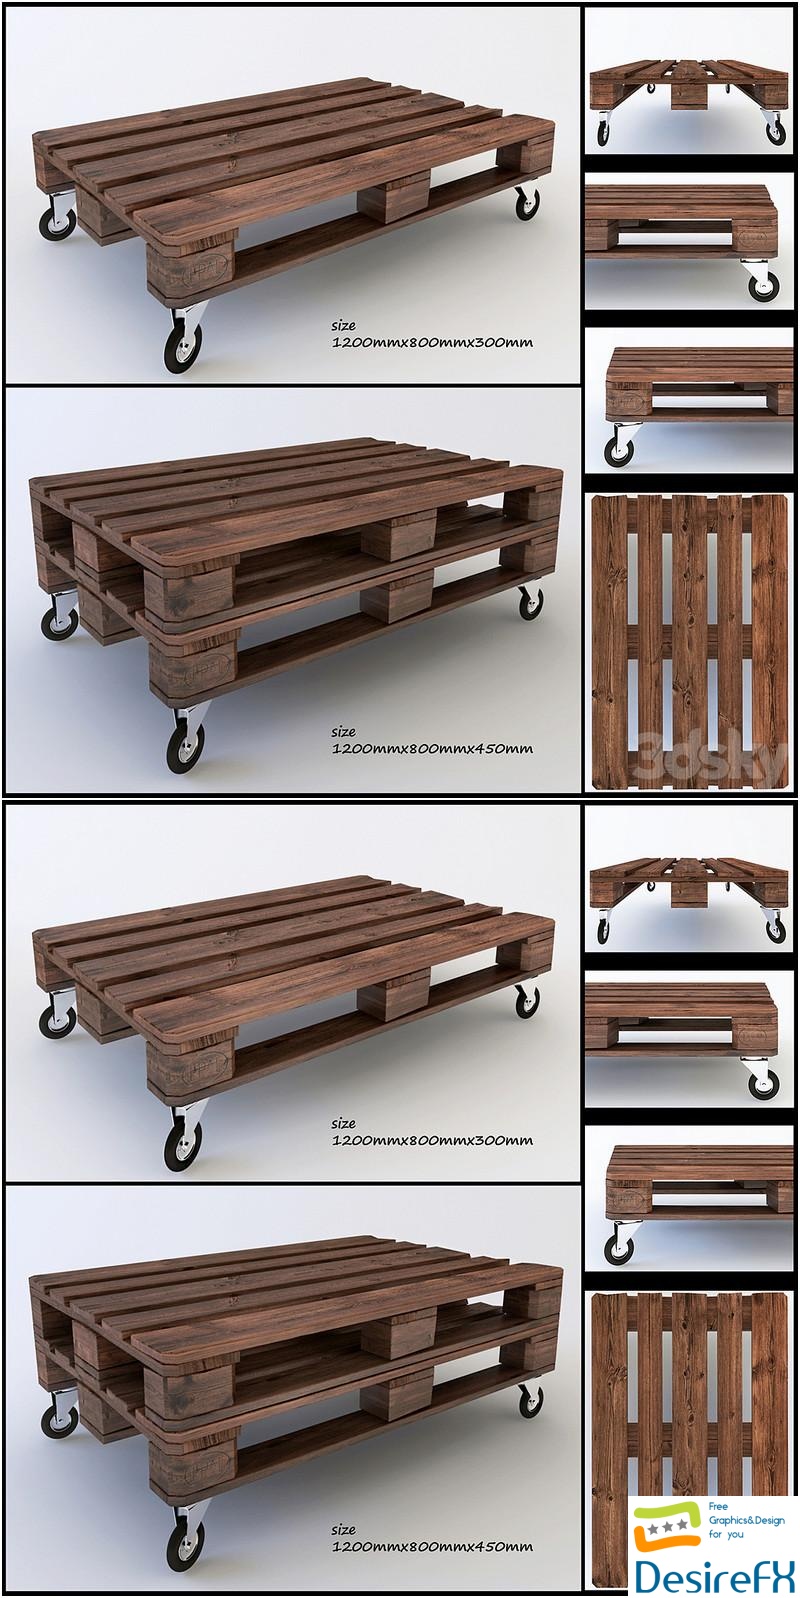 Table of wooden pallets 3D Model